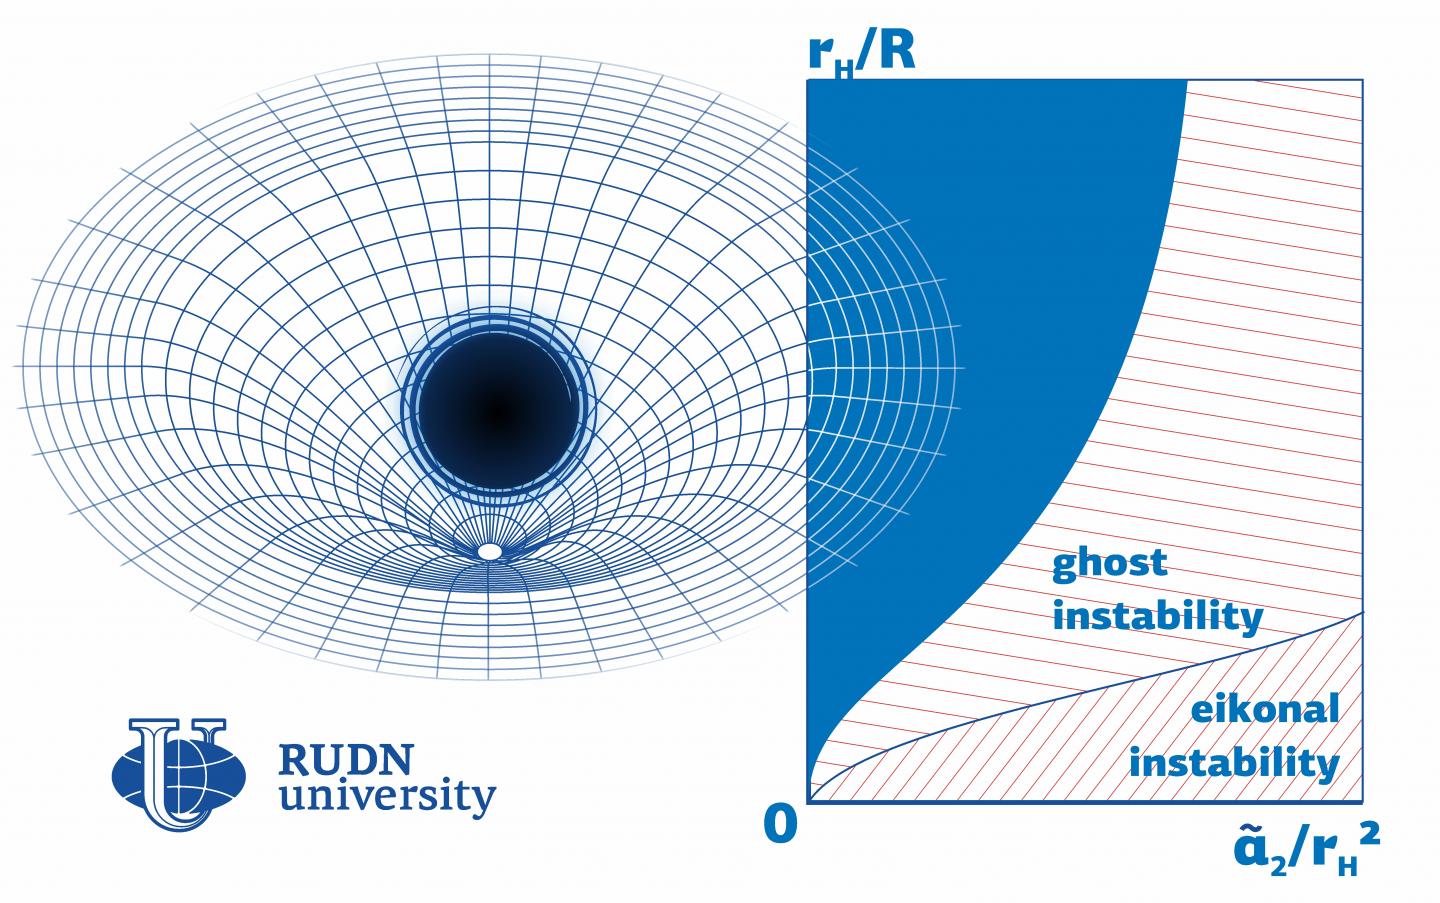 A Physicist from RUDN University Developed a Software Solution to Measure the Stability of Black Holes